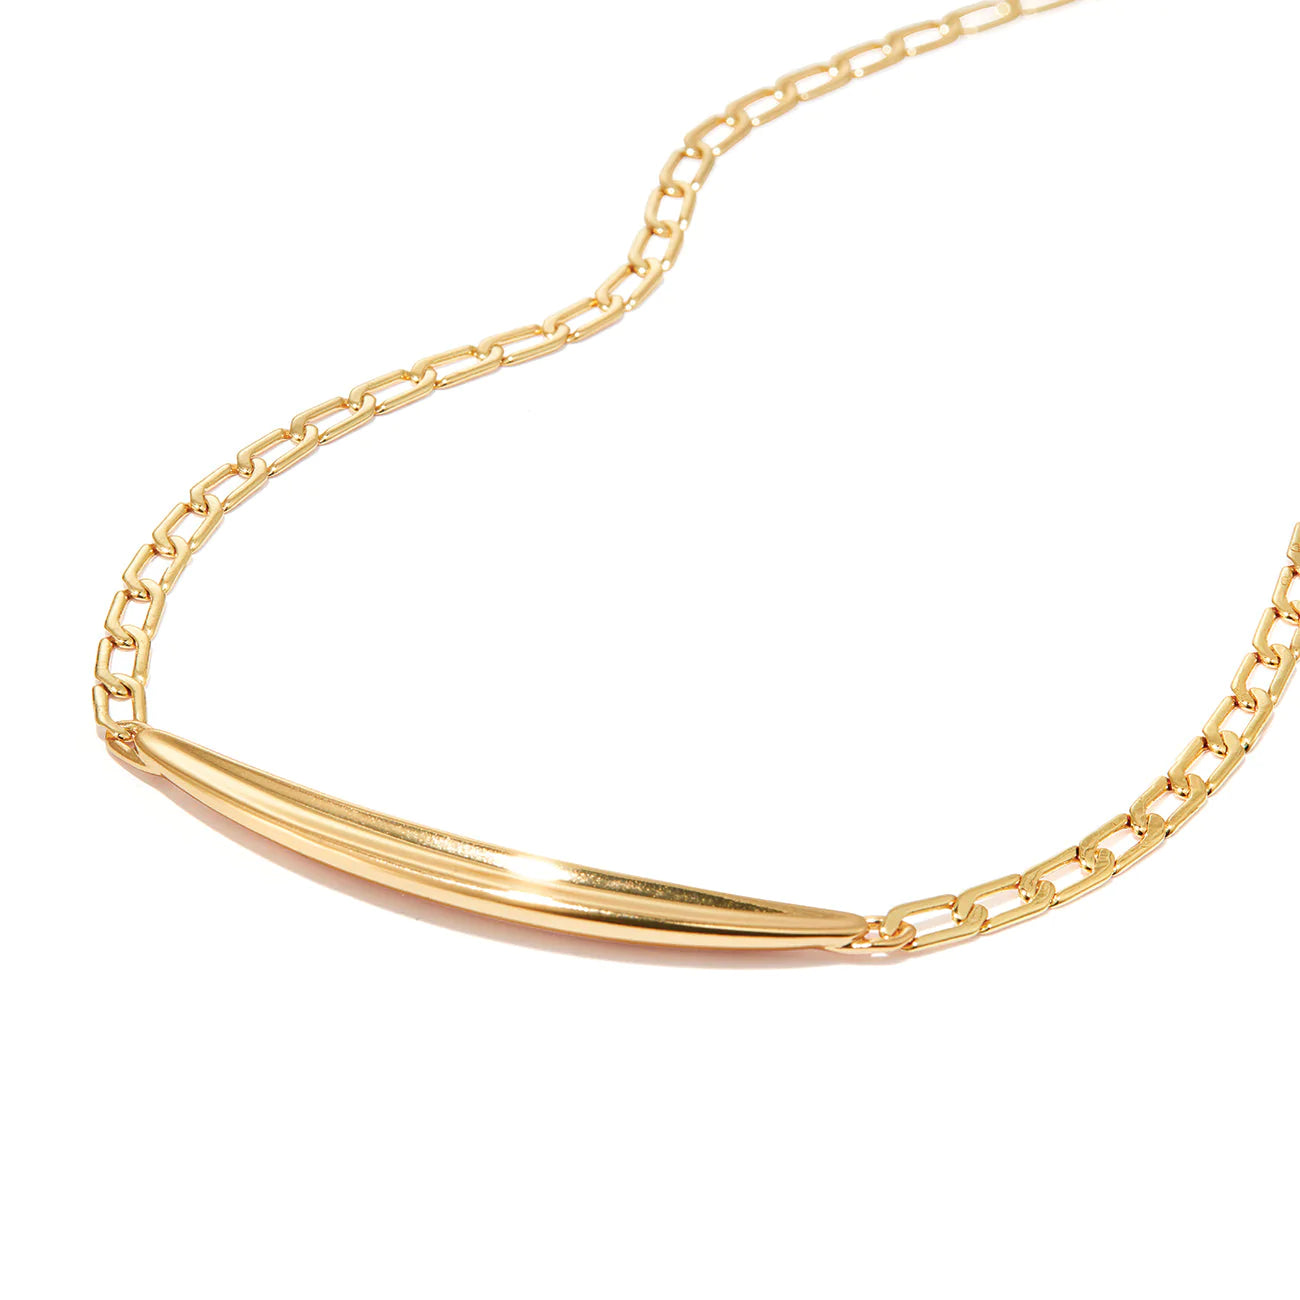 Willa Slim Necklace in Gold